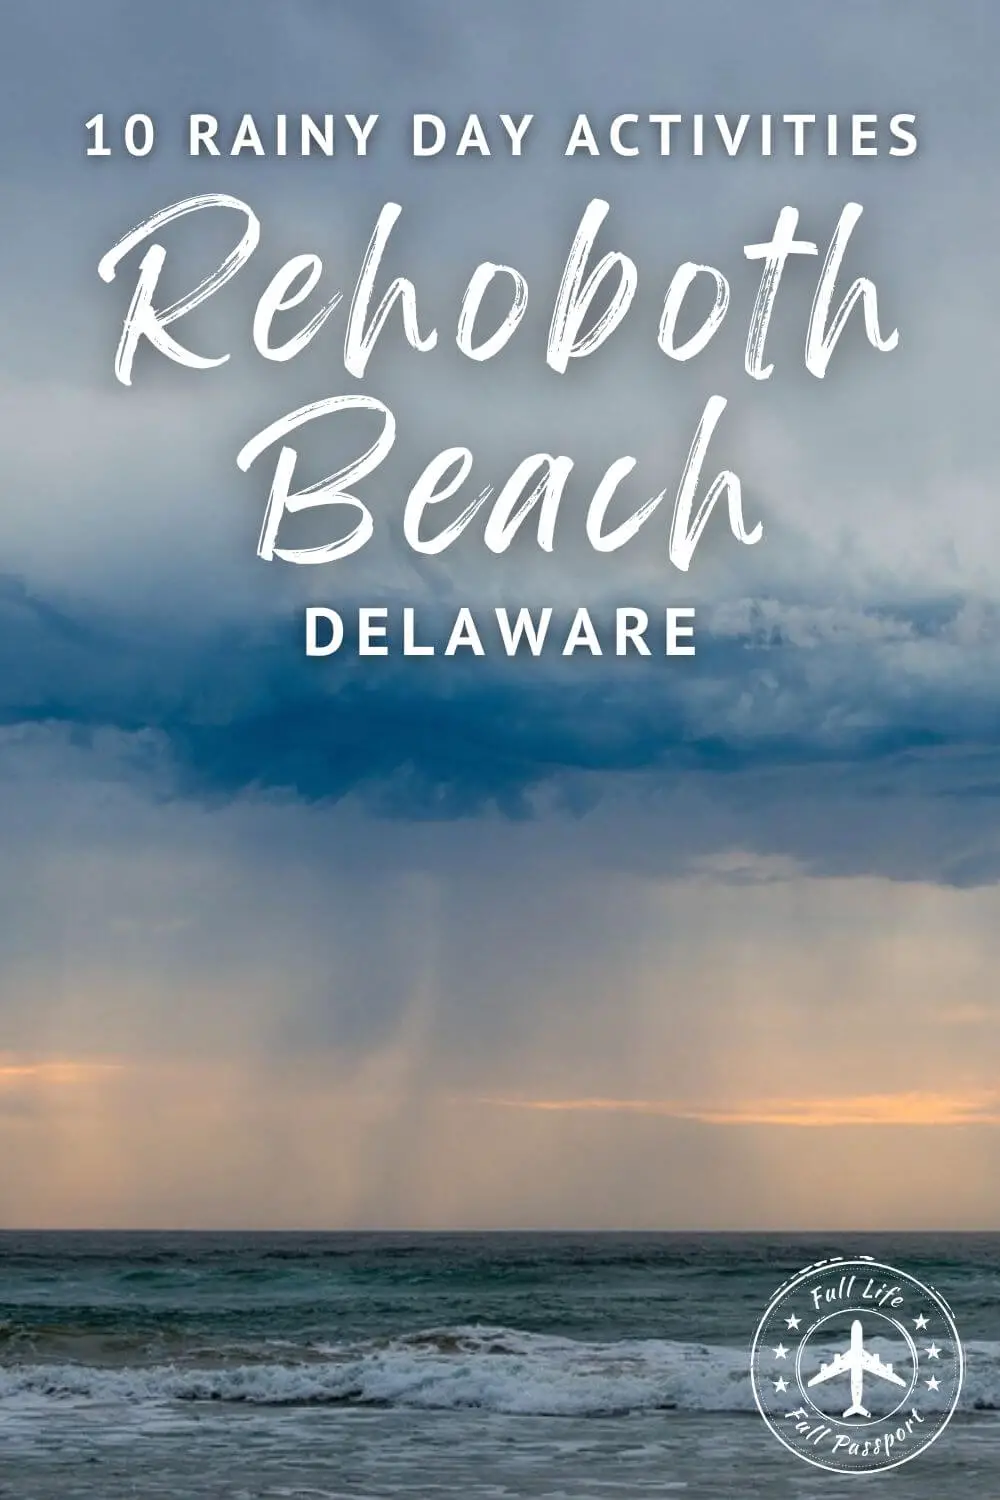 10 Things to Do on a Rainy Day in Rehoboth Beach